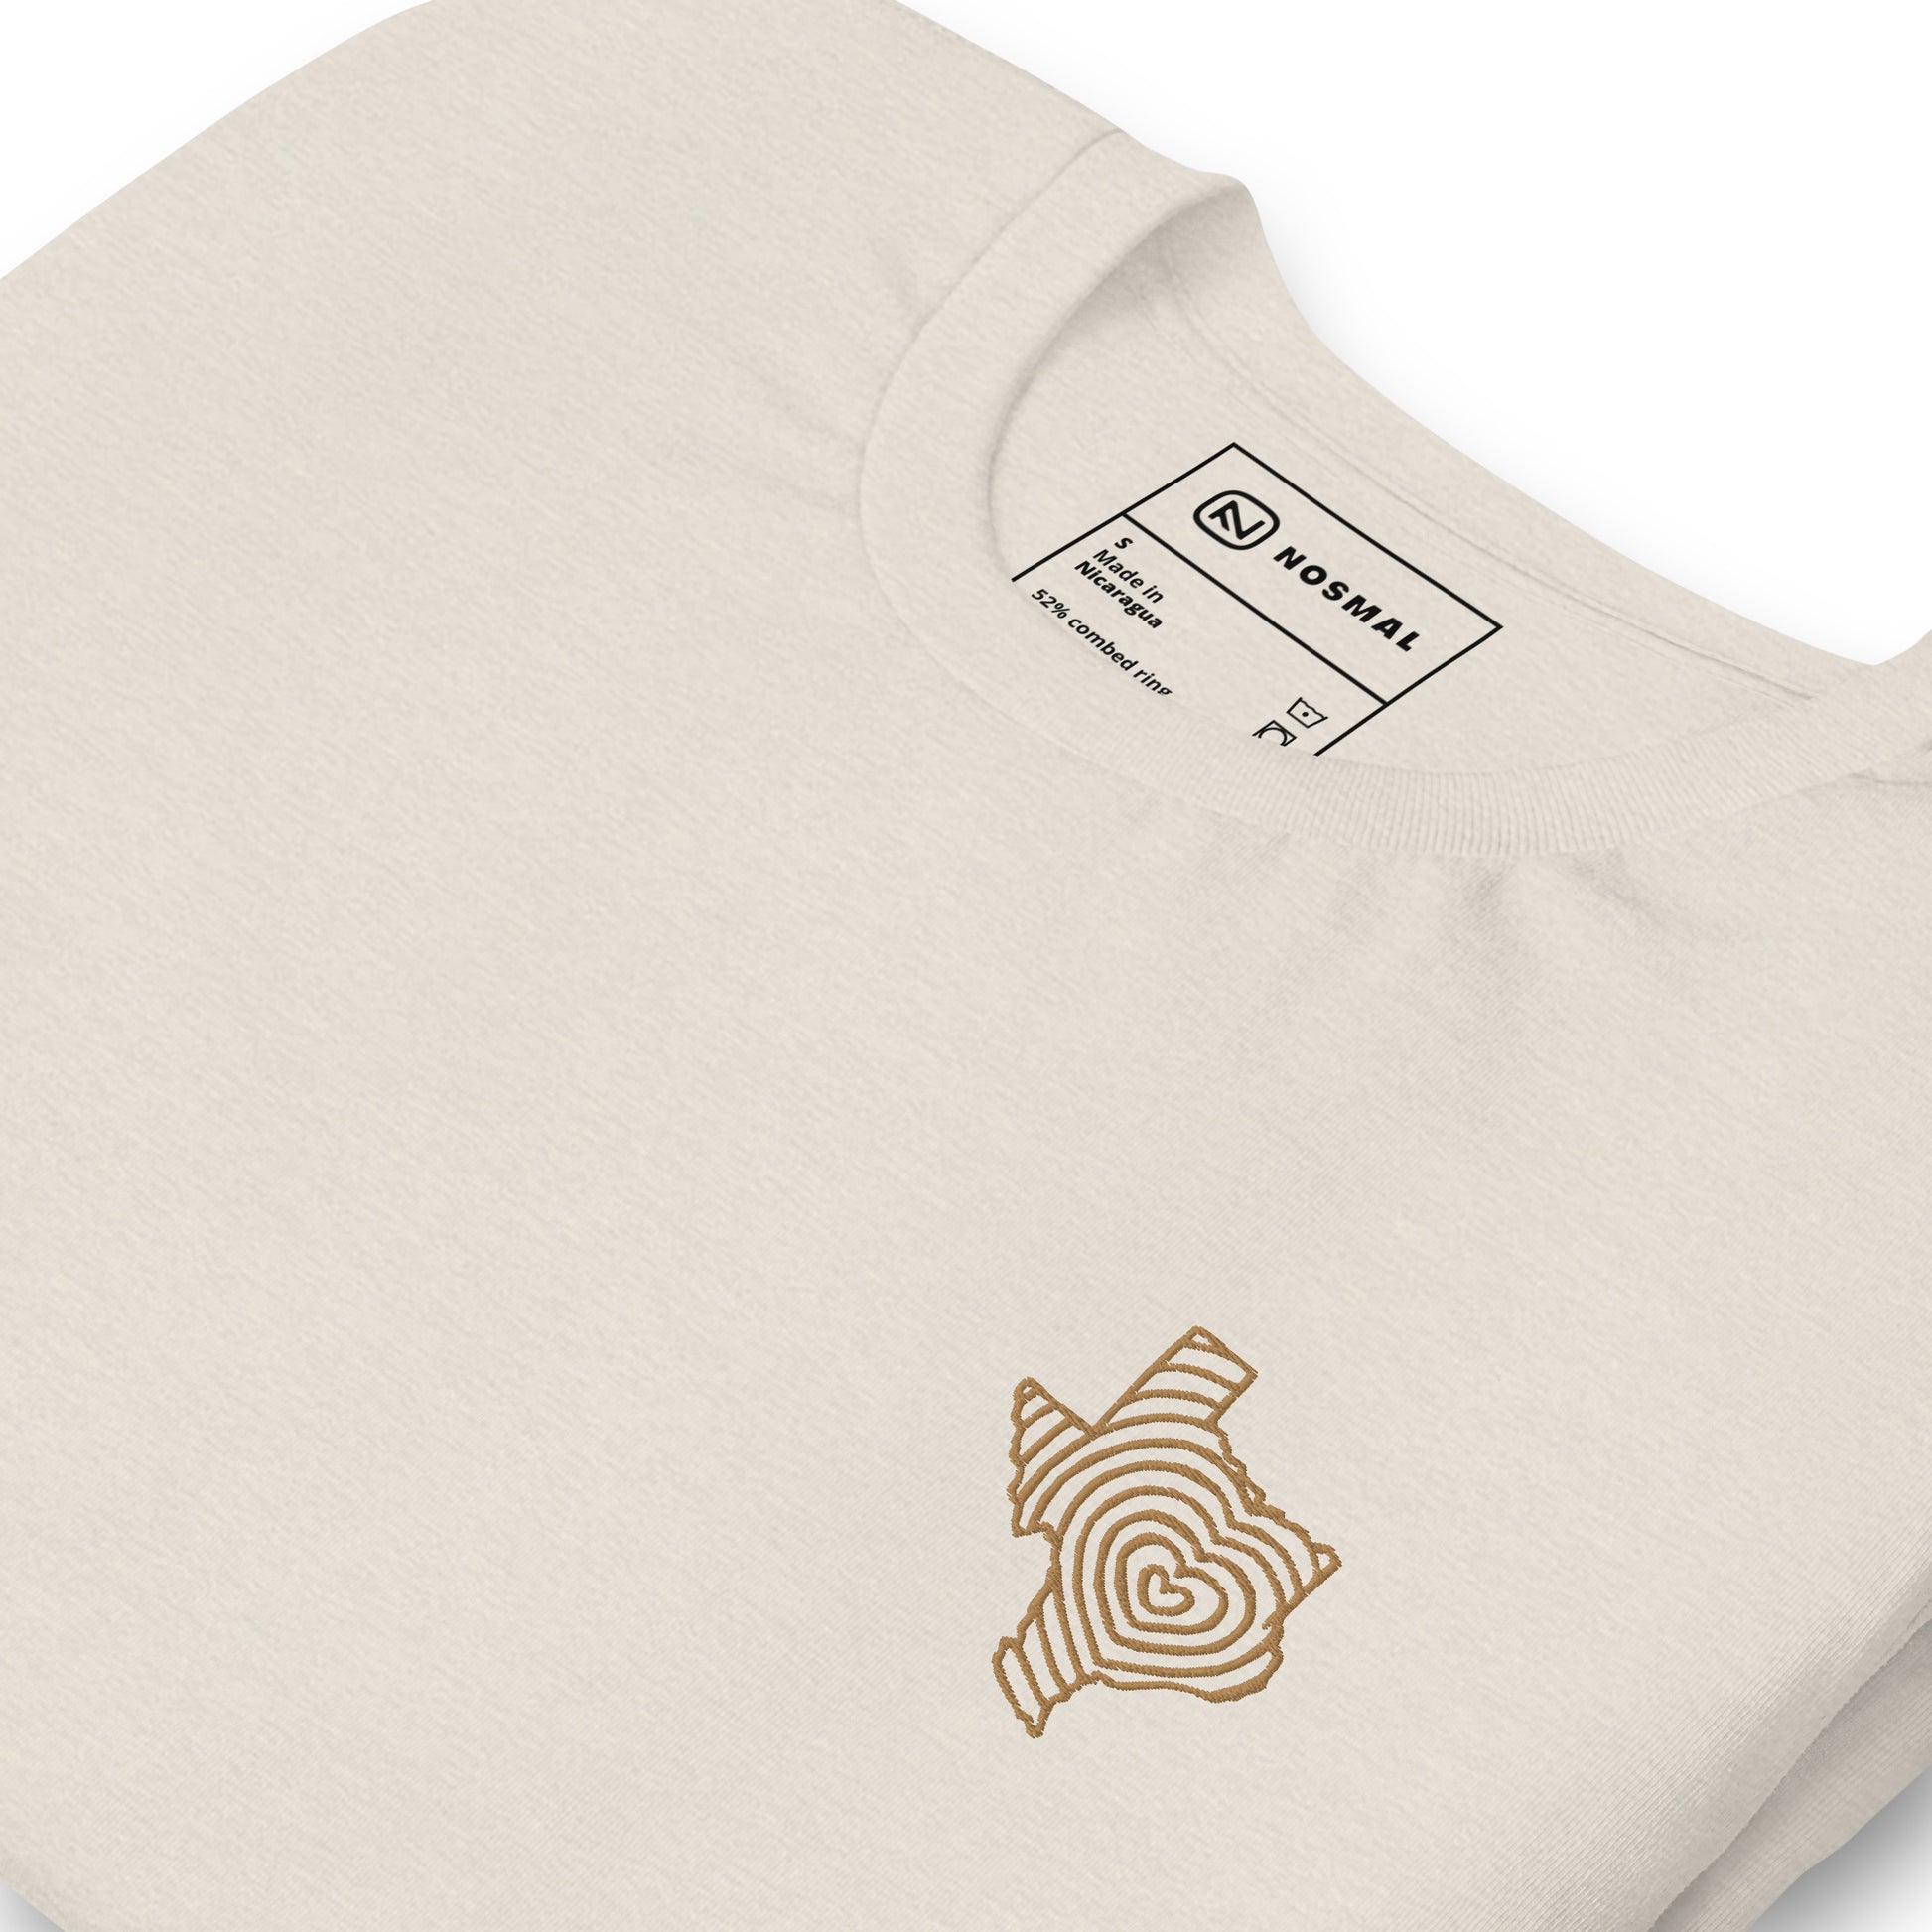 Angled close up shot of heartbeat of texas gold embroidered design on heather dust unisex t-shirt.